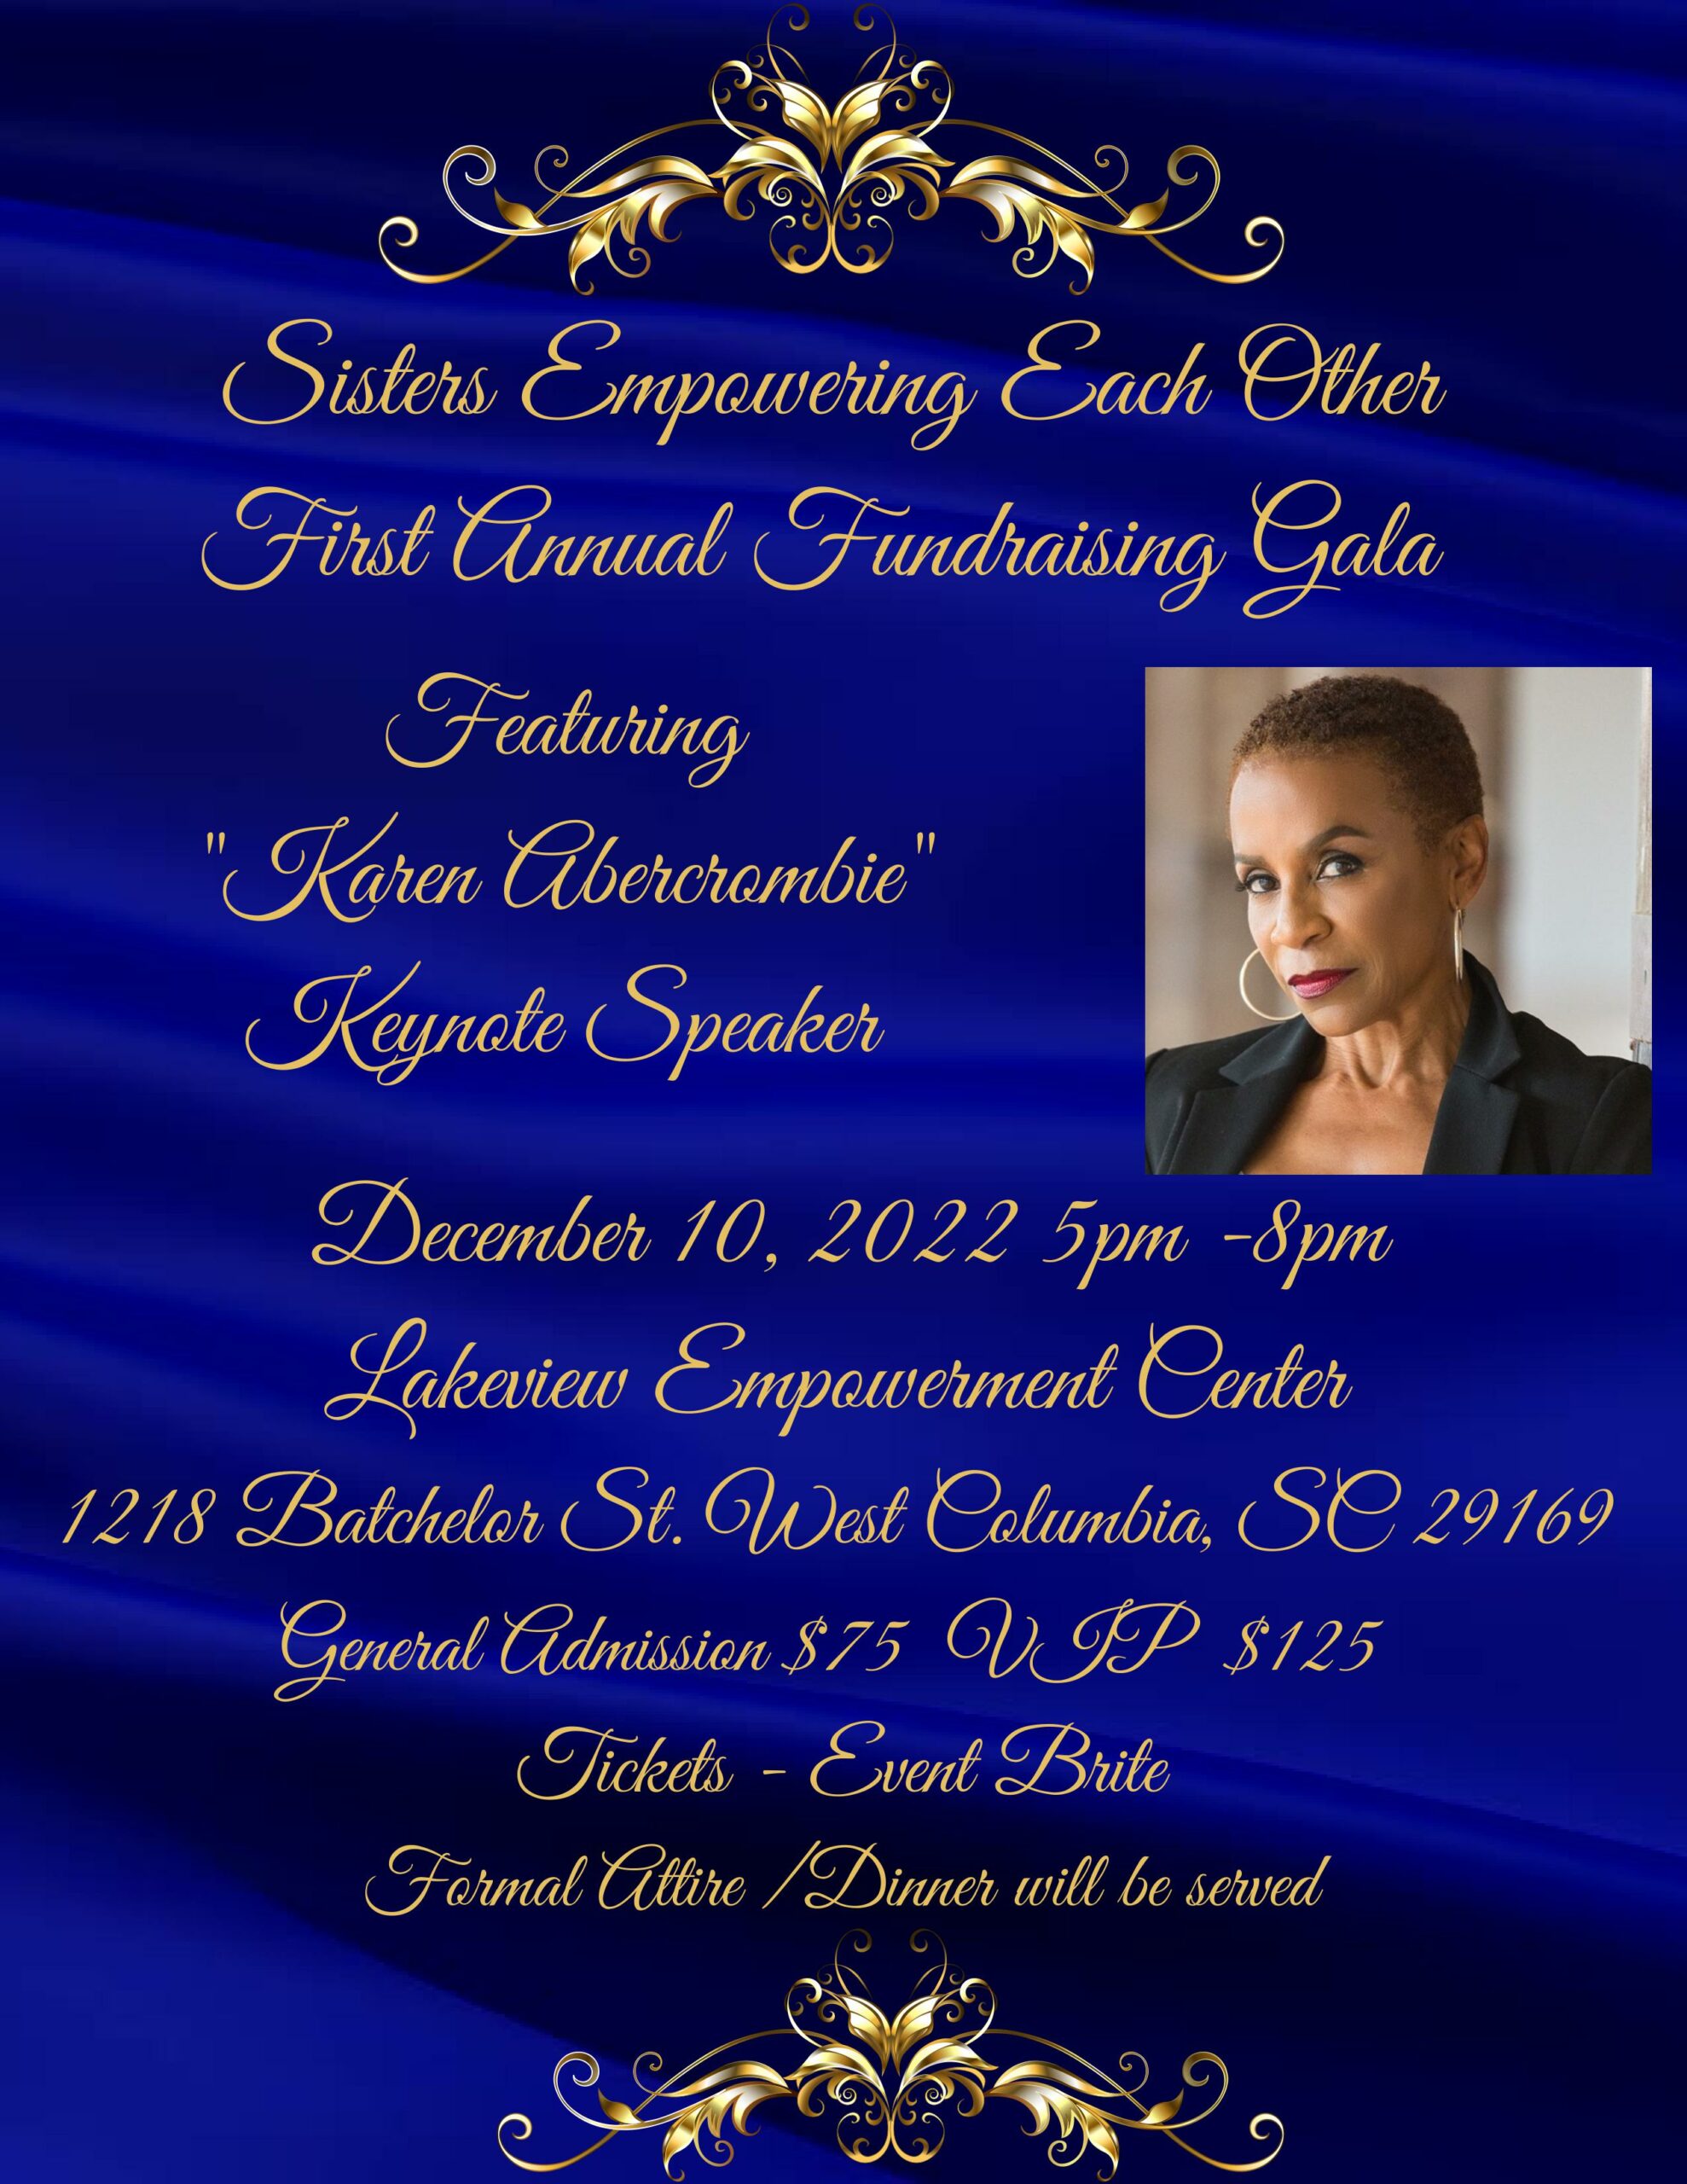 <h1 class="tribe-events-single-event-title">Sisters Empowering Each Other Gala</h1>